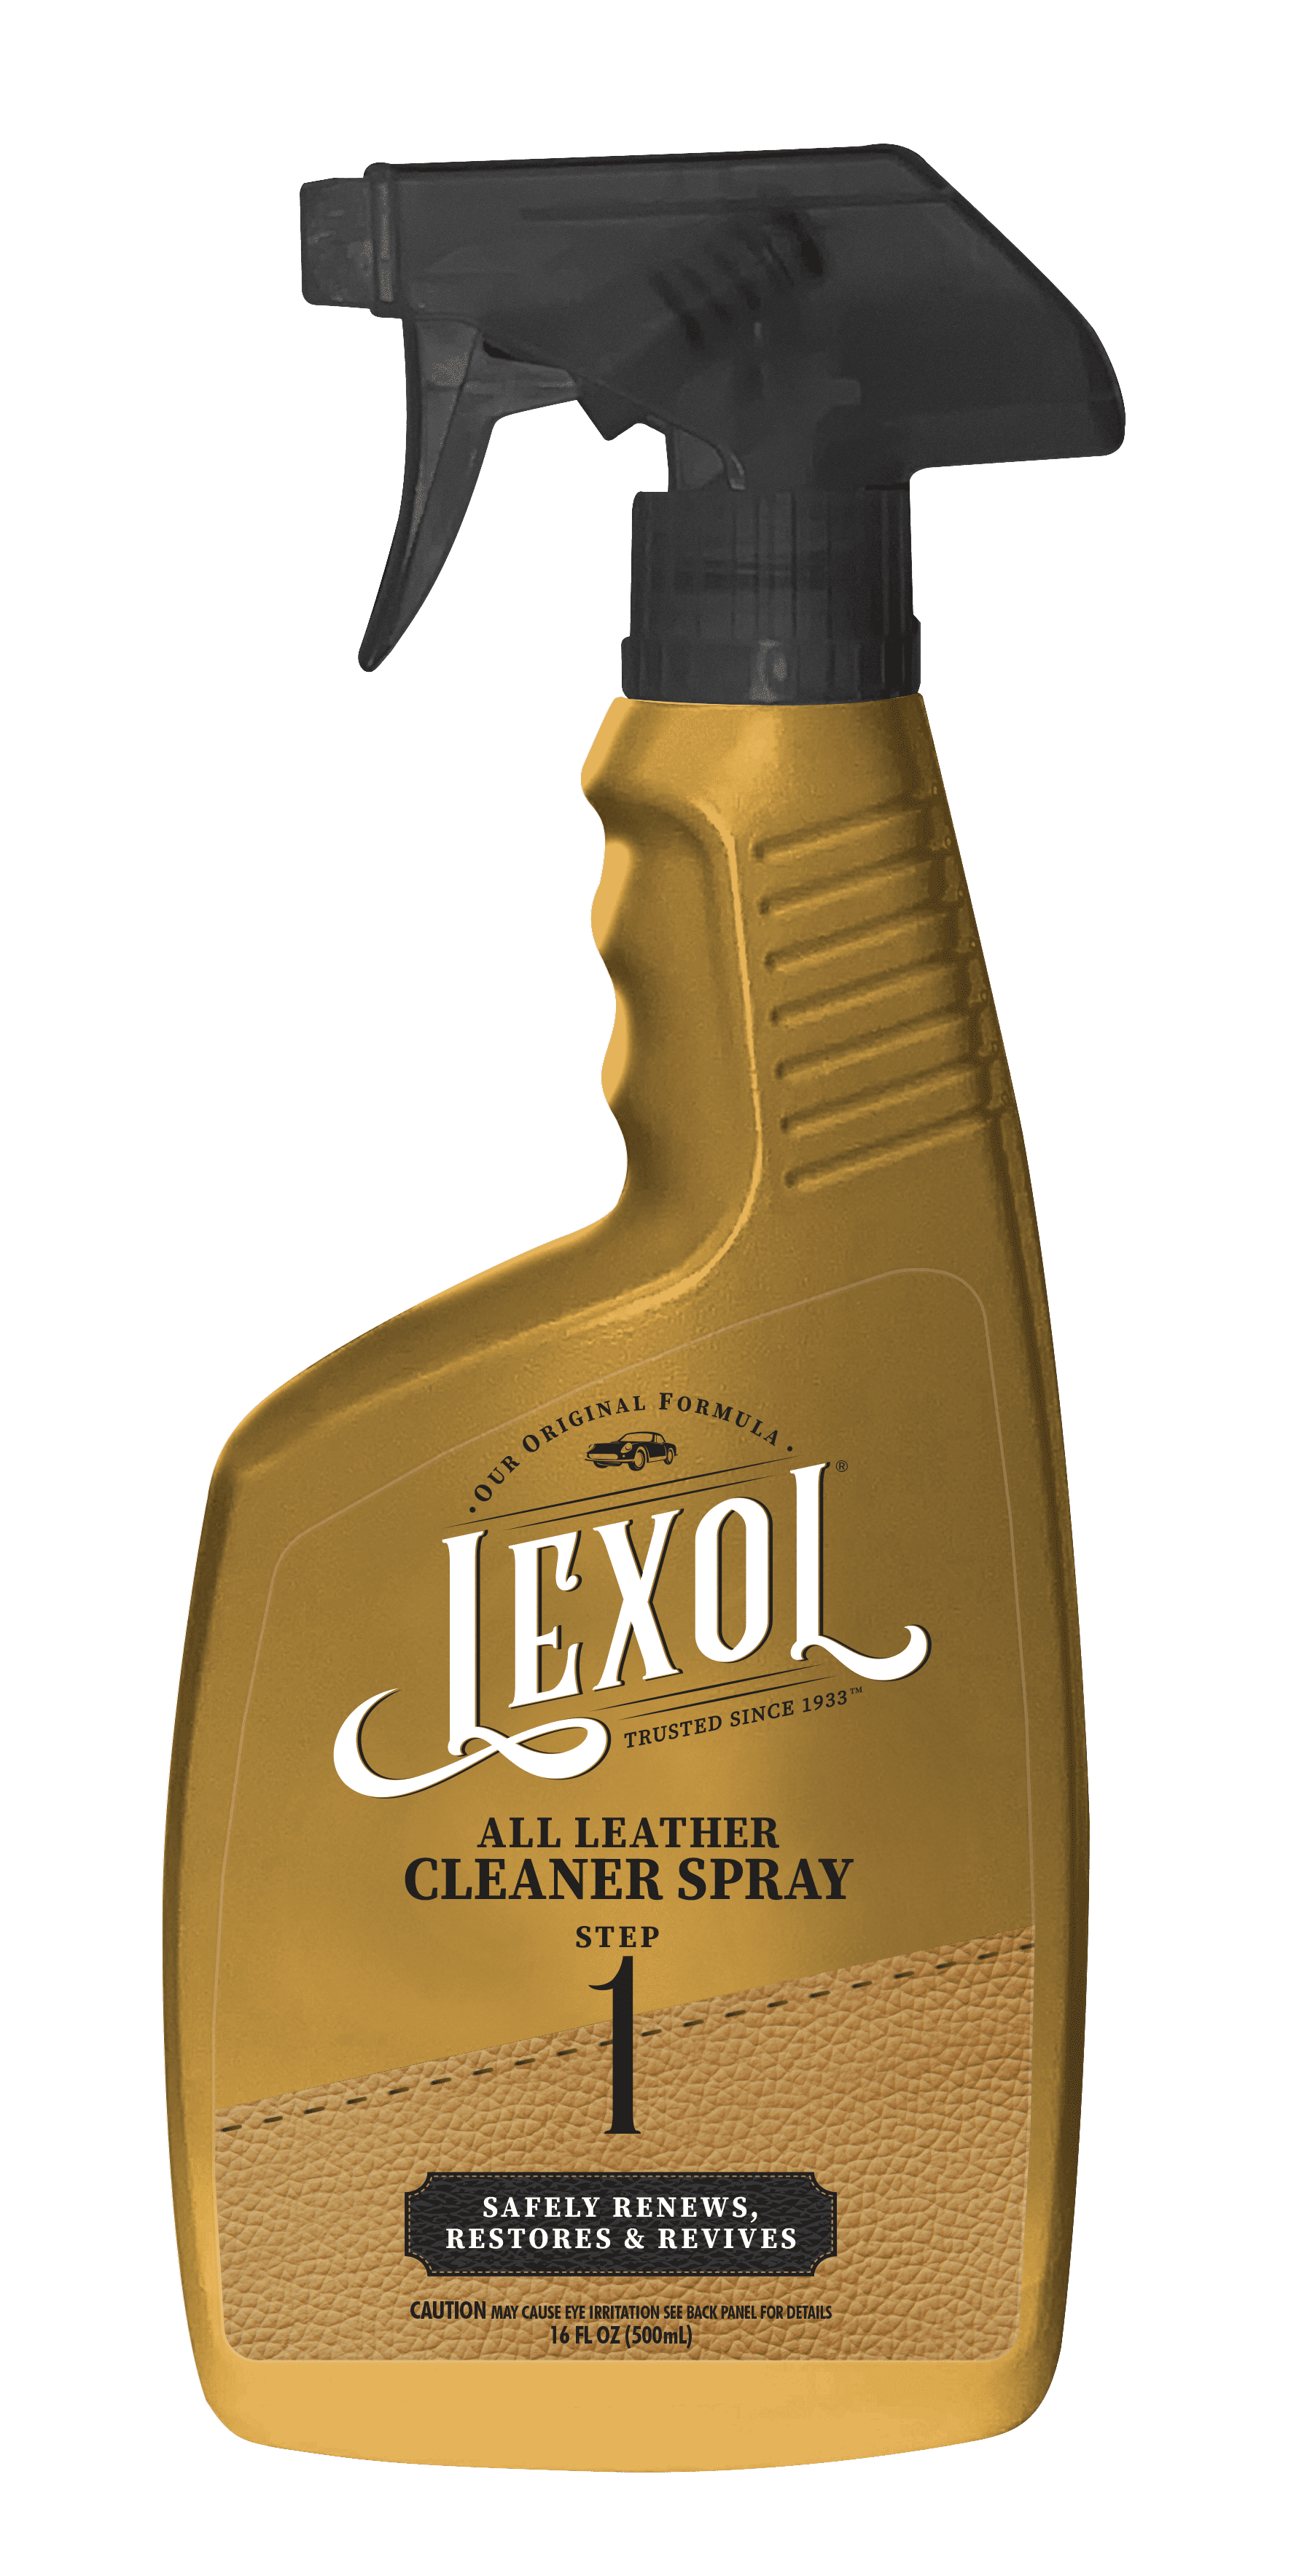 Lexol Leather Conditioner, Use on Car Leather, Furniture, Shoes, Bags, and Accessories, Trusted Leather Care Since 1933, 16.9 oz Bottle